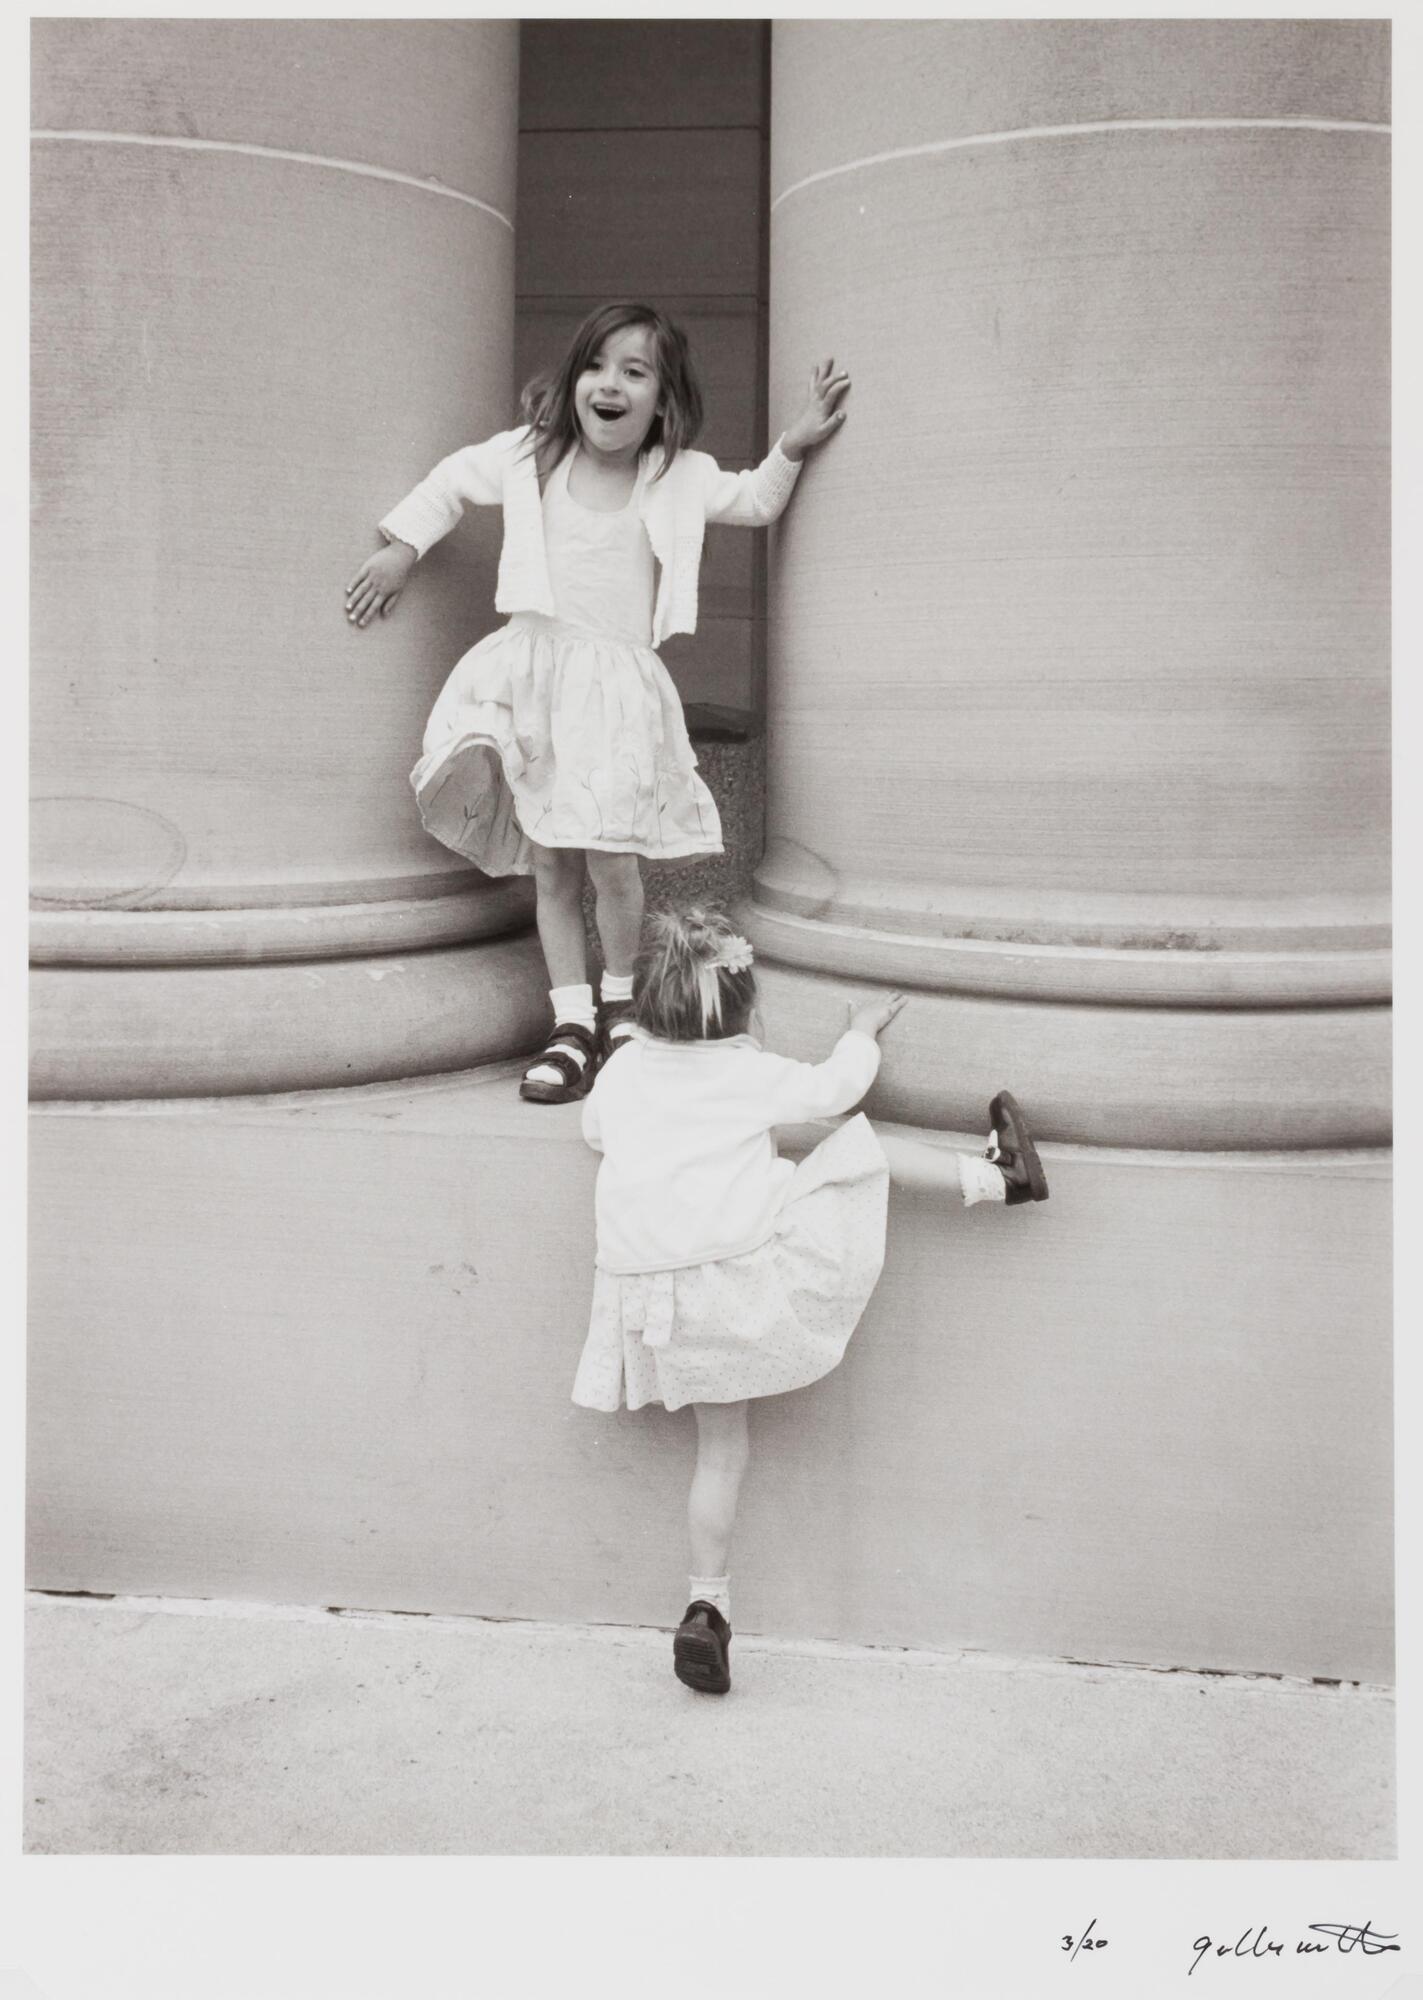 Two girls in white dresses and sweaters climbing on large concrete pillars. one is climbing up, the other is posing.